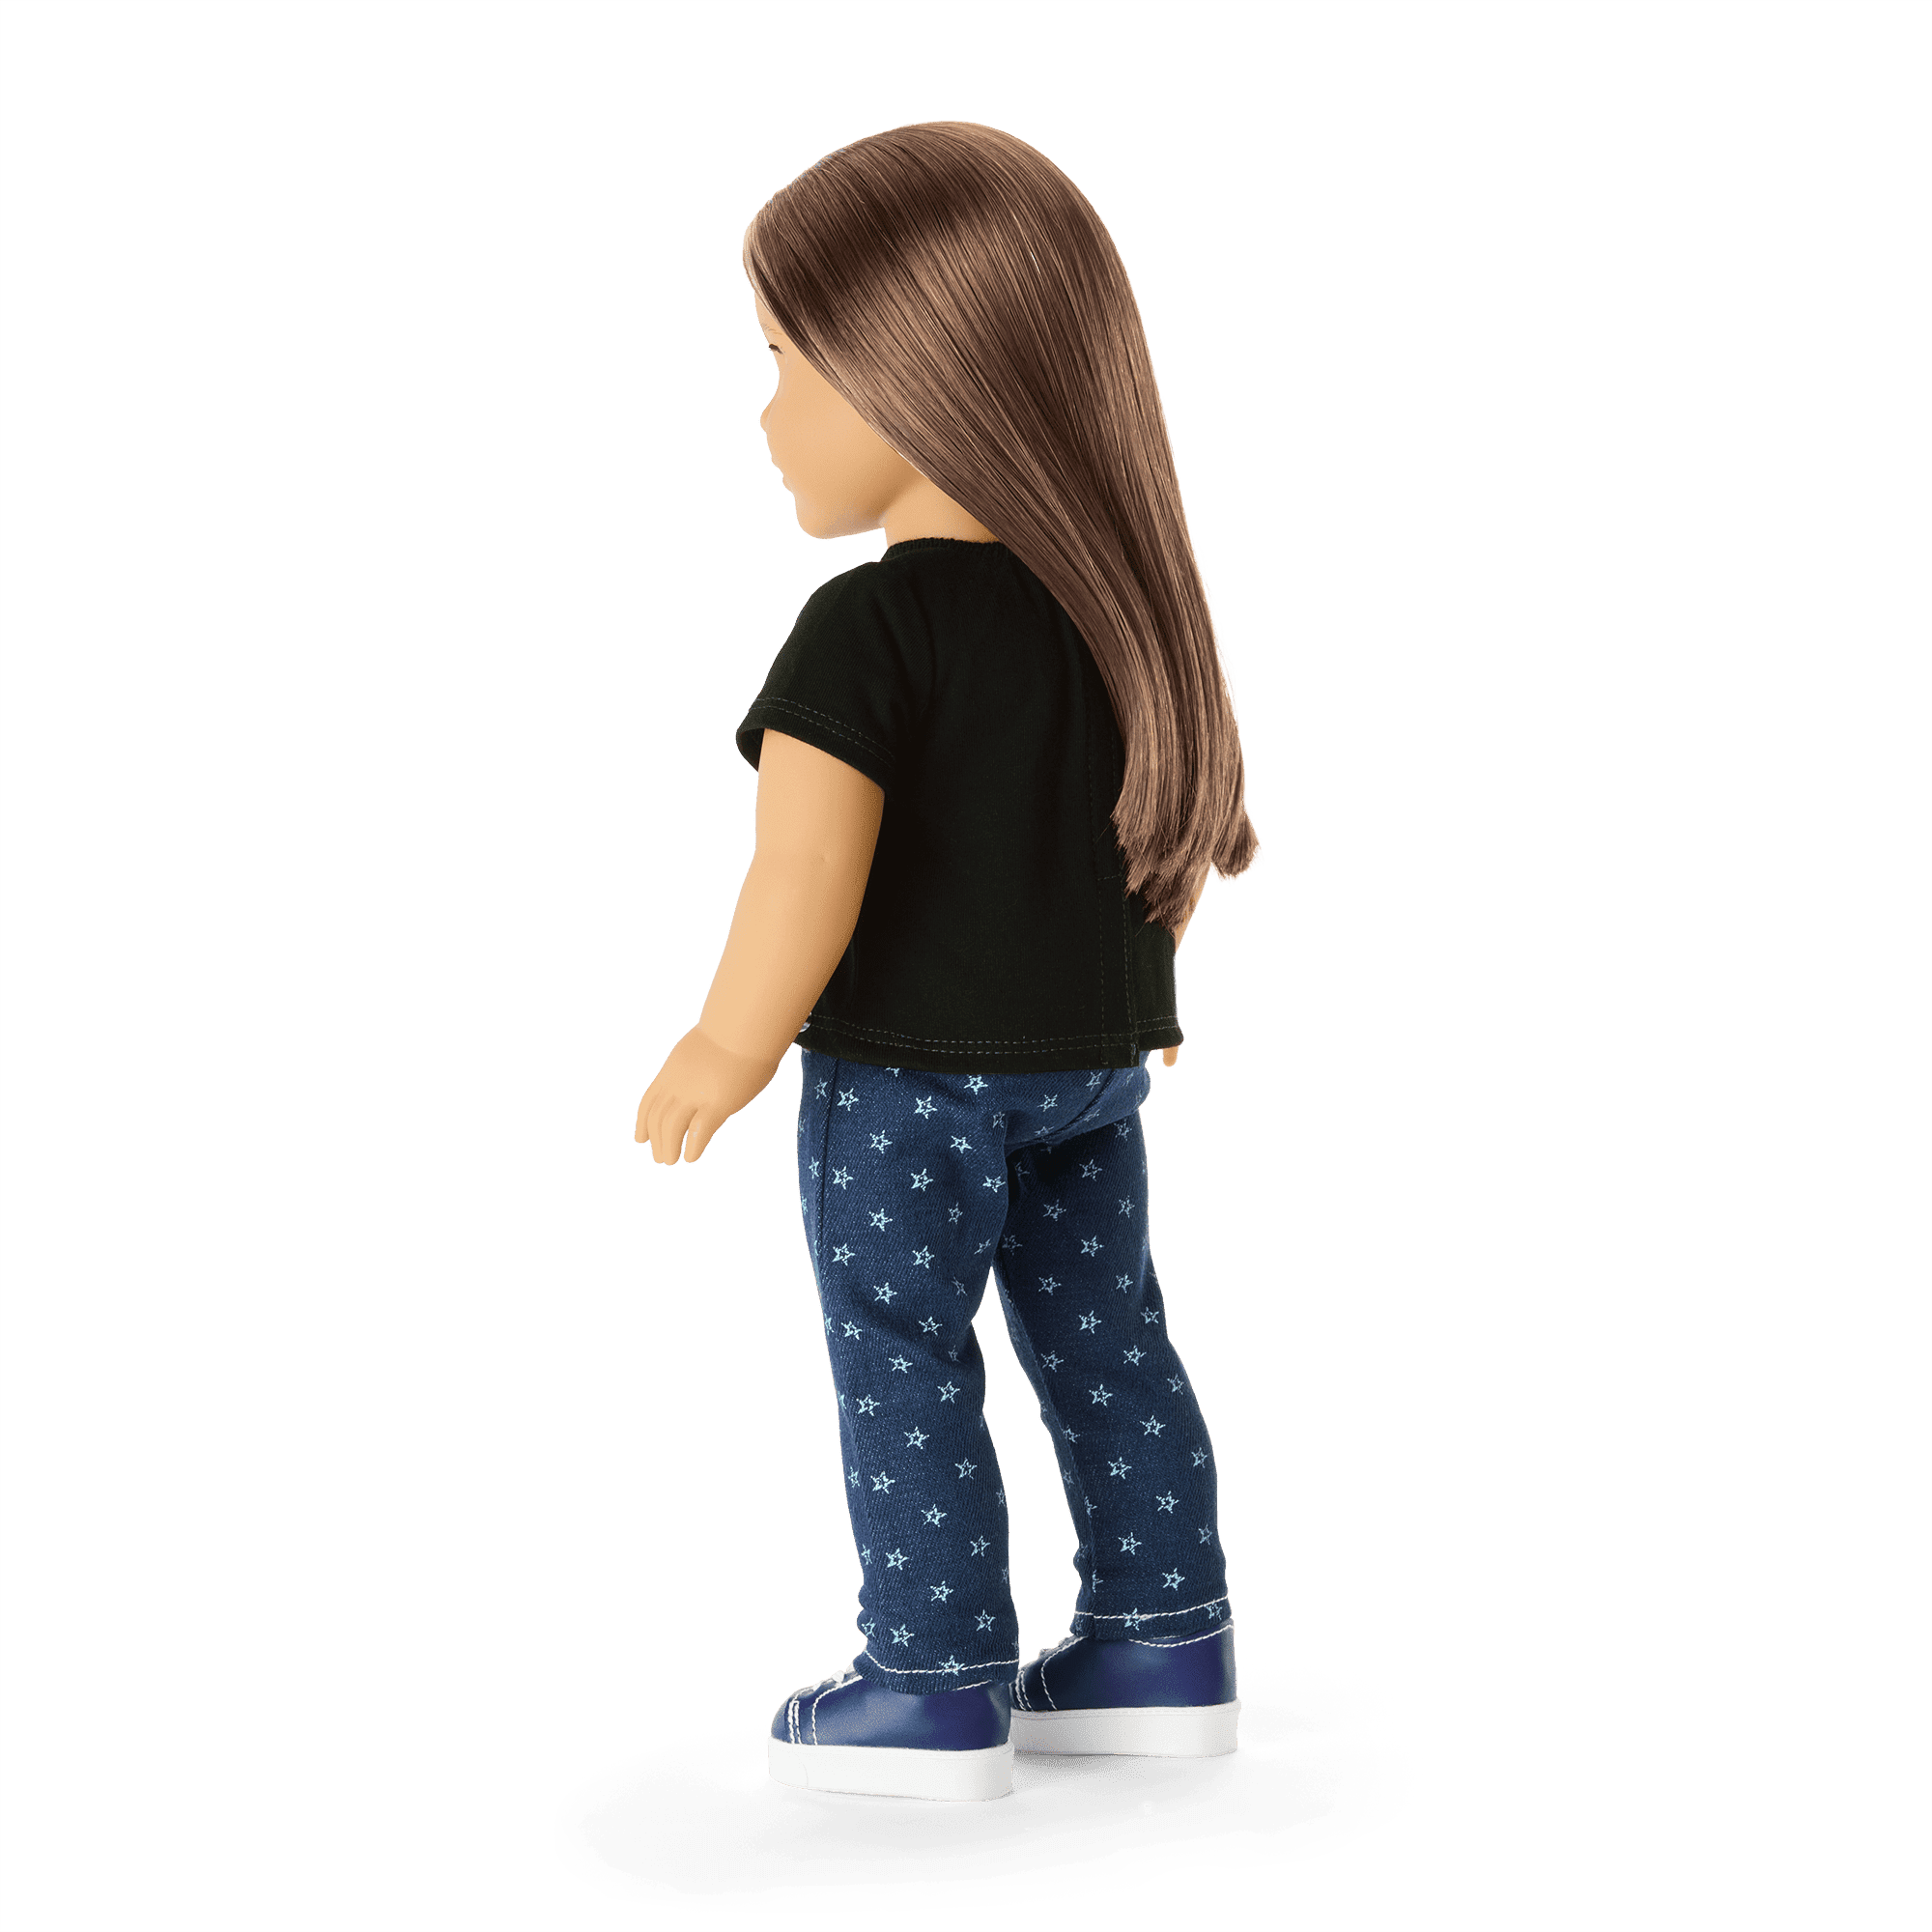 American Girl Today™ Tees for Girls & 18-inch Dolls (Historical Characters)